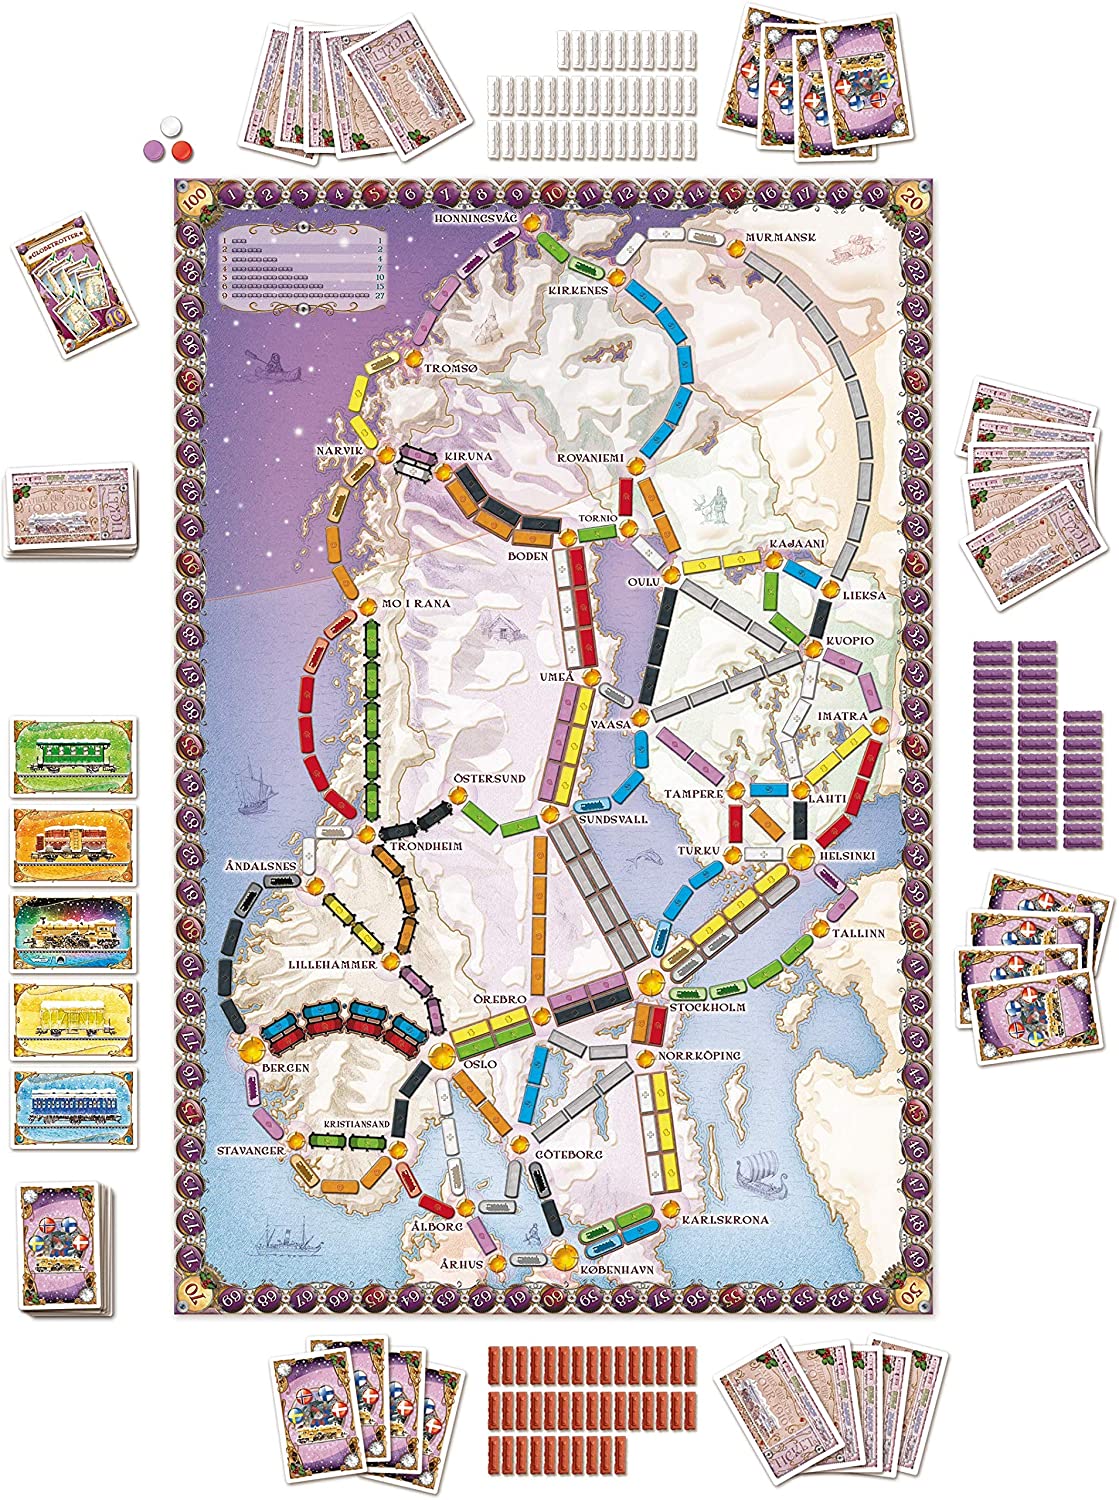 Ticket To Ride Nordic Countries Days of Wonder